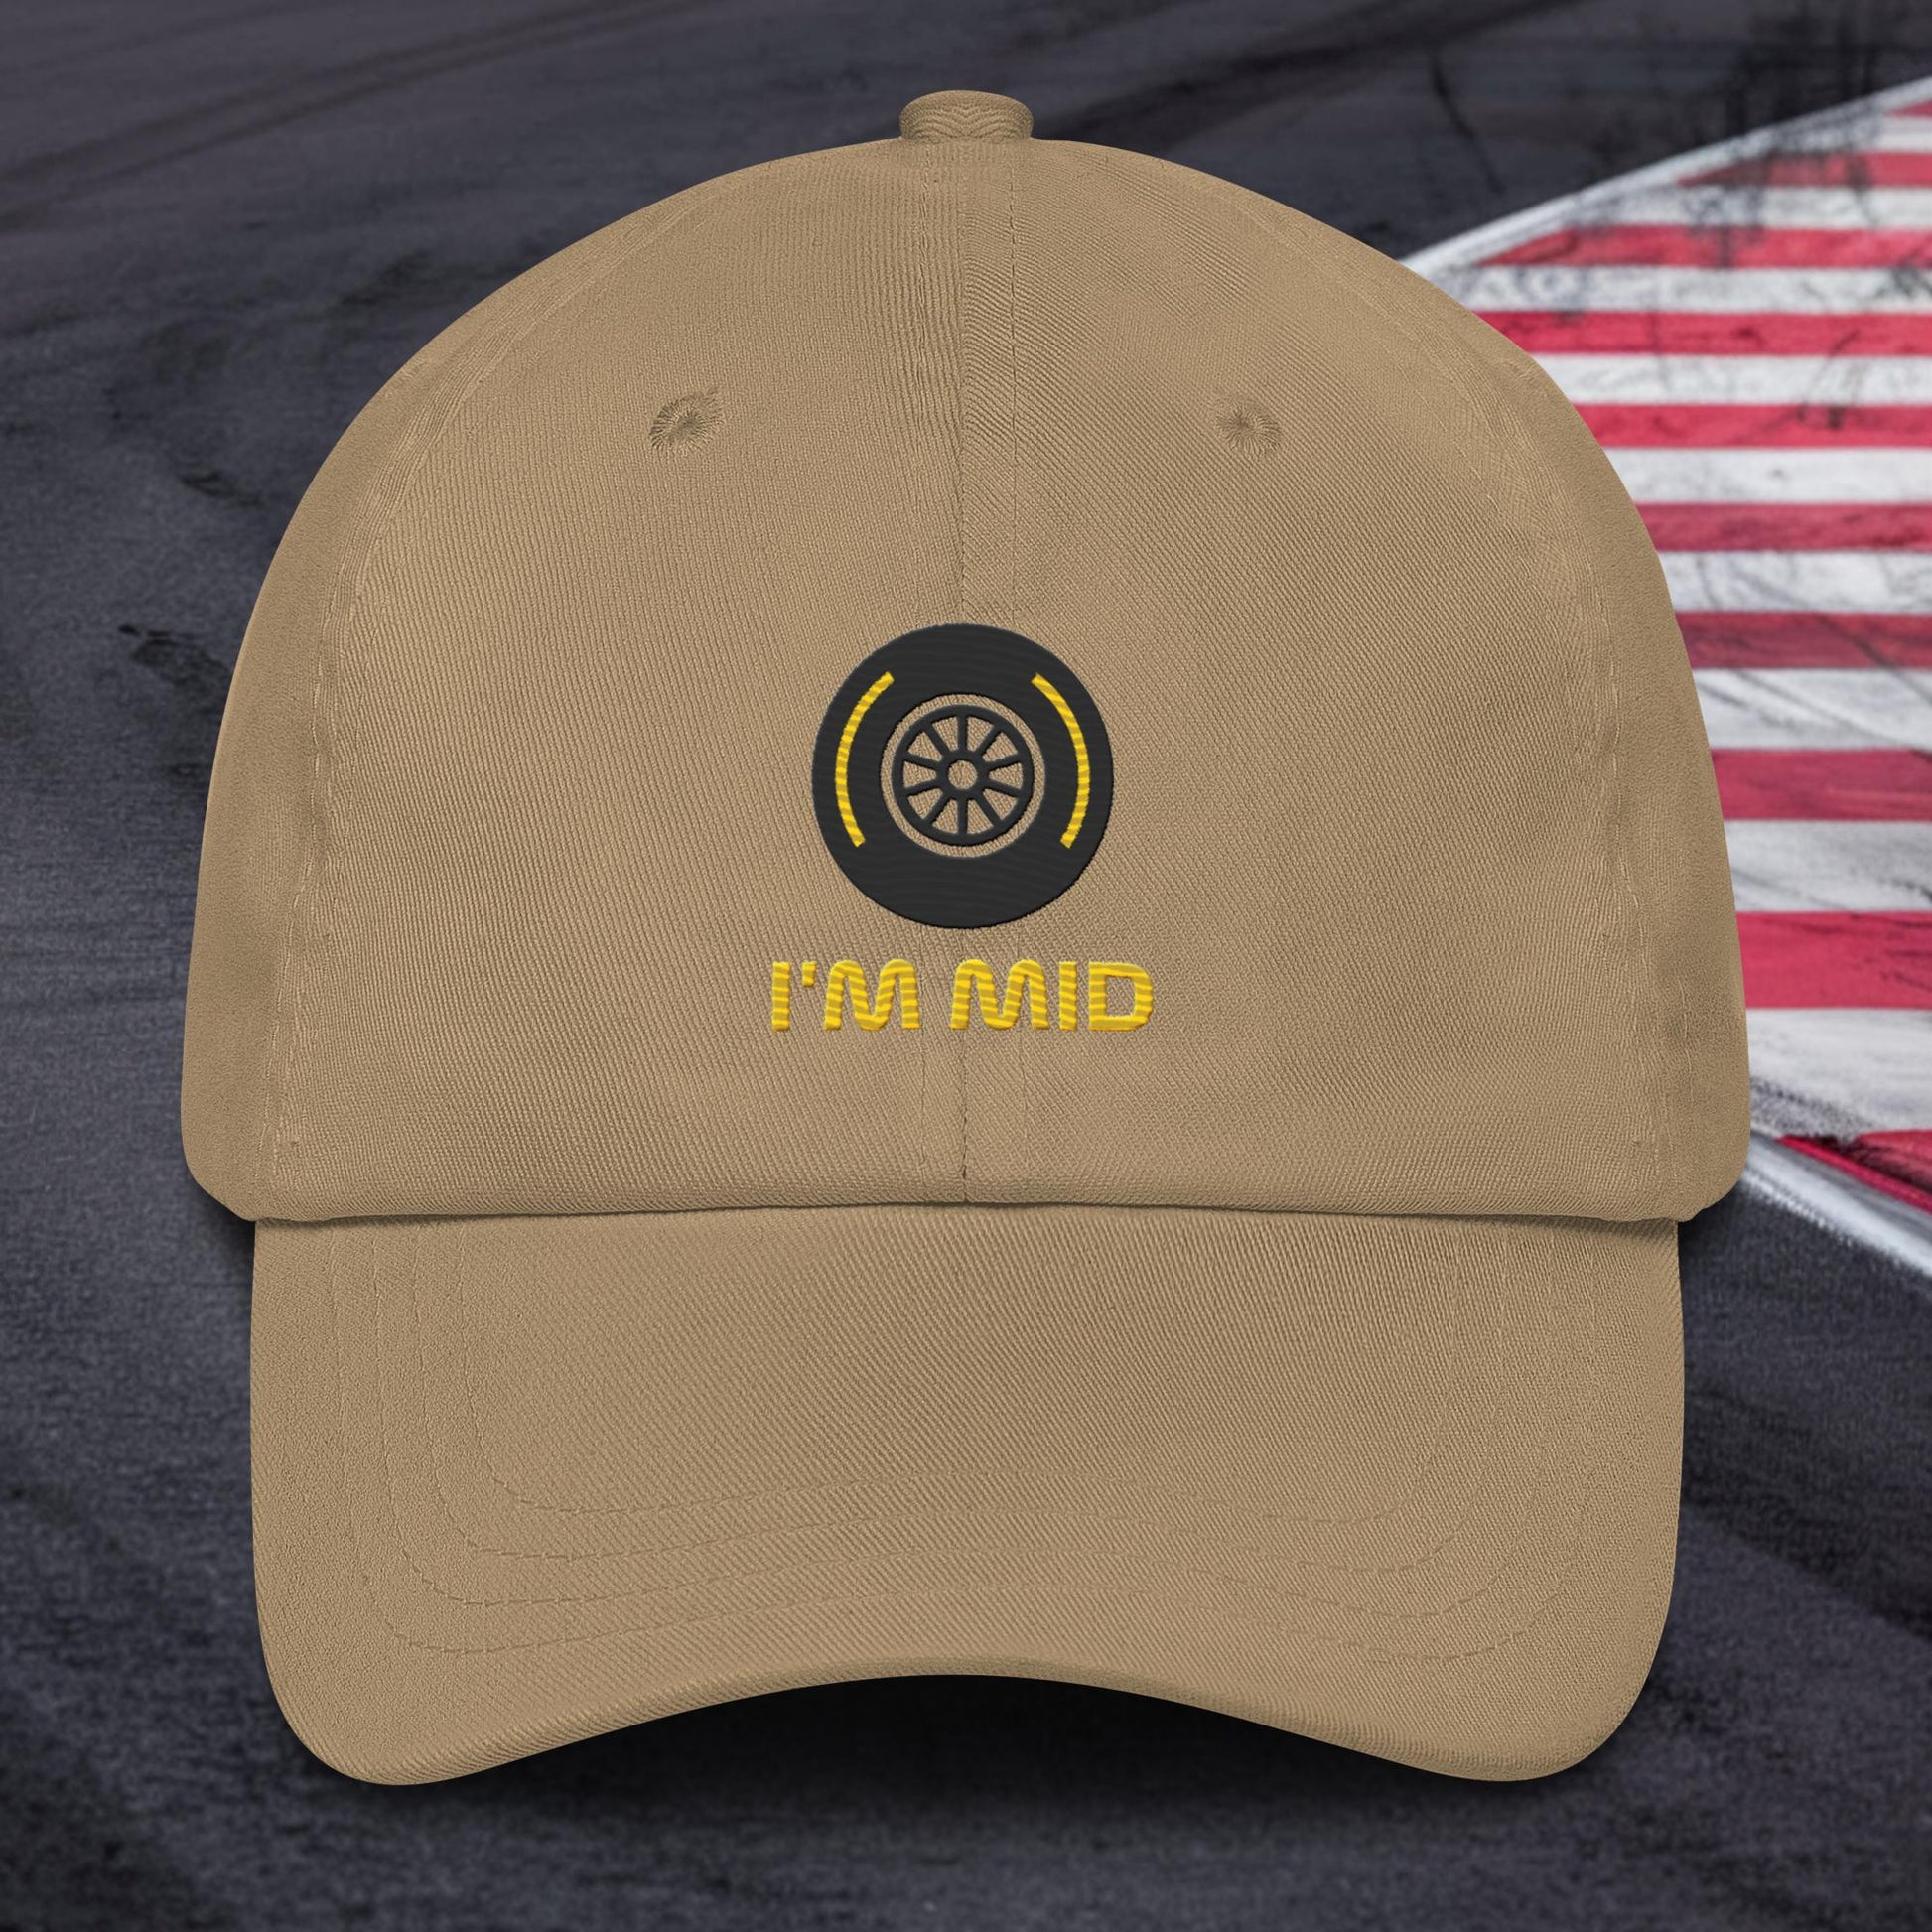 I'm Mid Tyres Funny F1 Dad hat Next Cult Brand